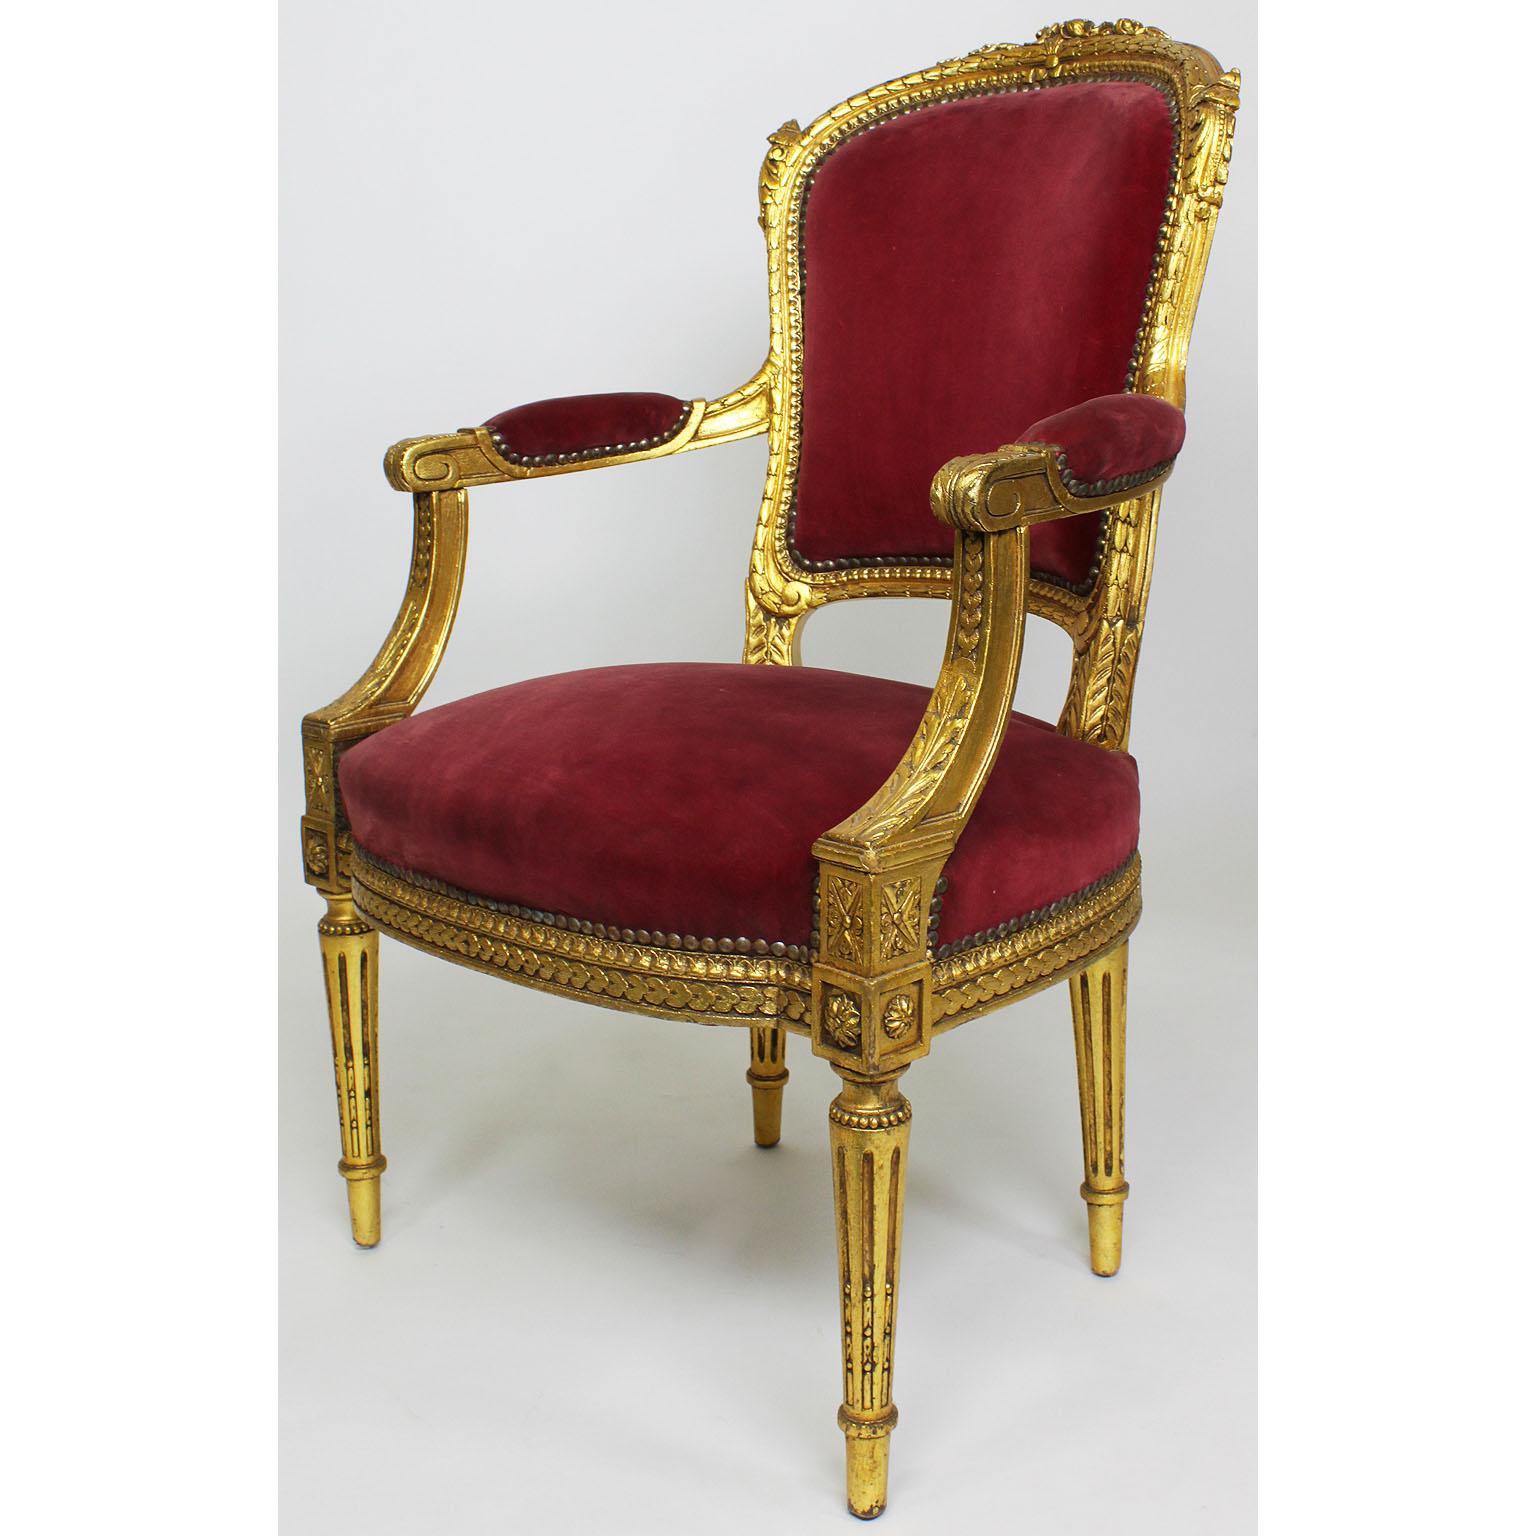 A pair of French Louis XVI style giltwood carved Rococo fauteuils (armchairs). The intricately carved wood frames with open and padded armrests and fluted legs. Upholstered in burgundy velvet Paris, circa 1900s.

Measures: Height 36 1/2 inches